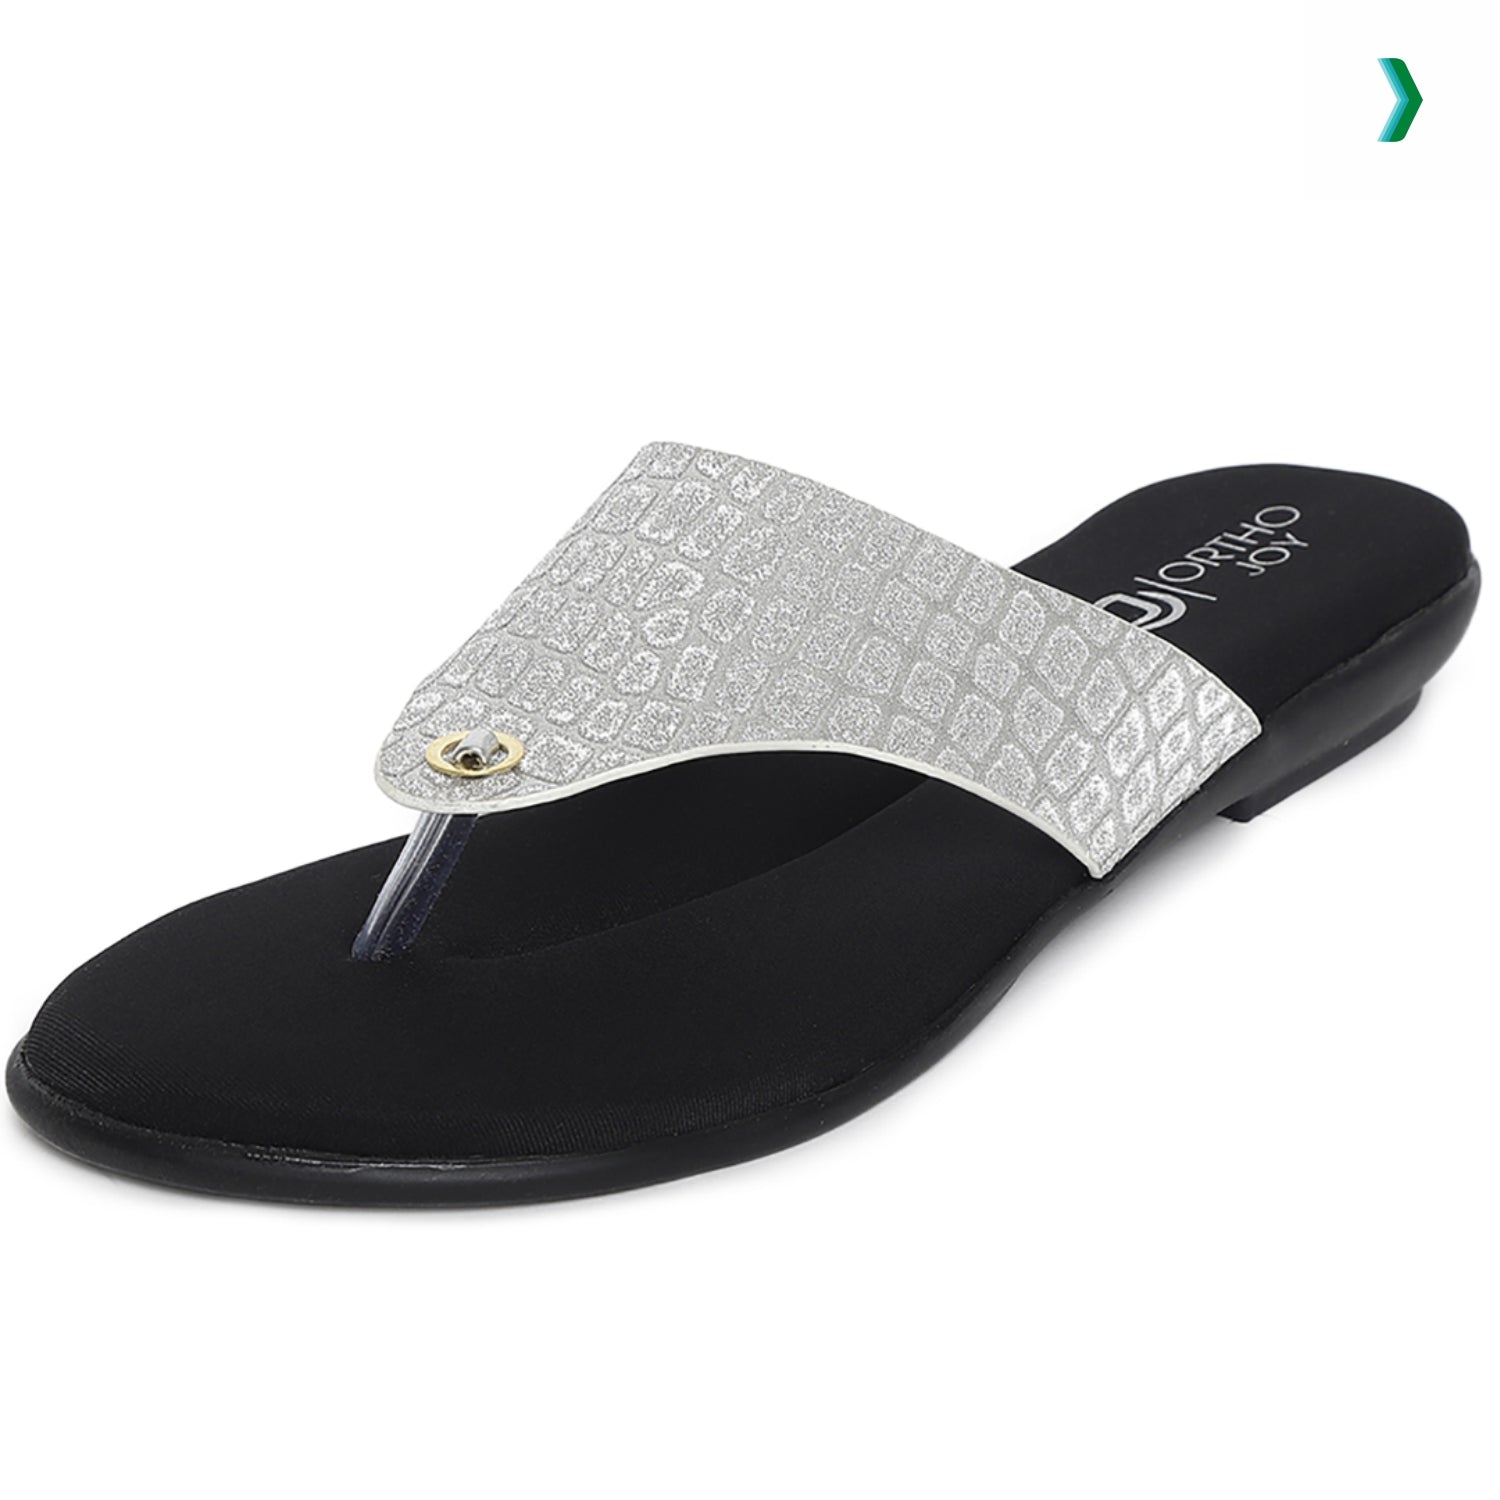 doctor slippers for ladies, doctor chappal for ladies, fancy slippers ladies